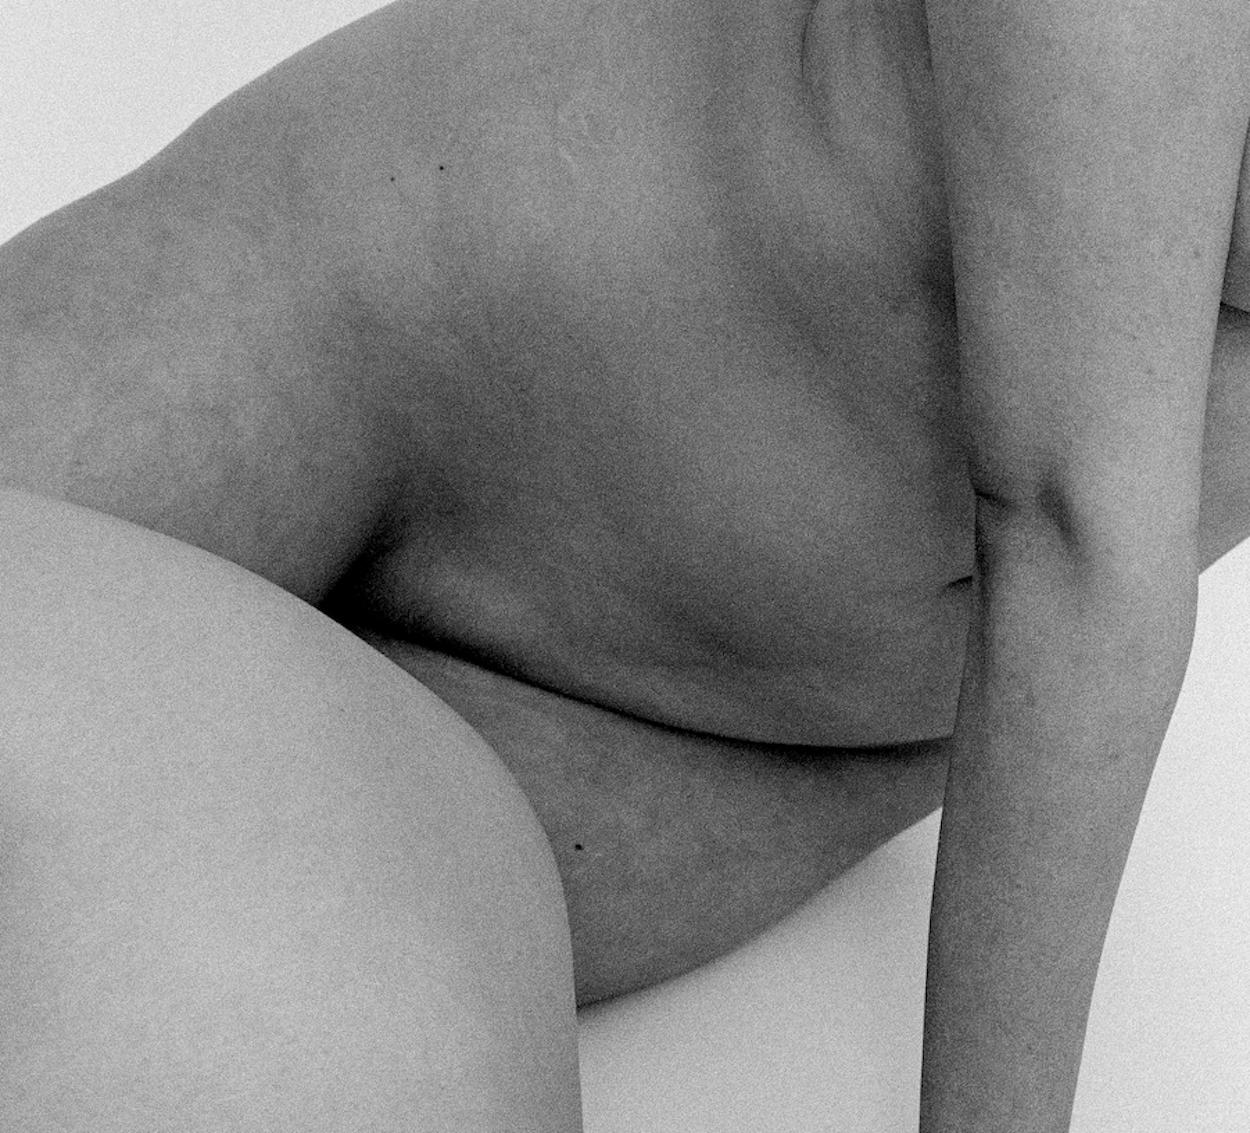 These photographs explore tonality, texture, mass and depth in context of the human figure. 

These figure studies intend to explore and demonstrate the shapes and patterns of human form in the context of tonality and space. Line, movement through